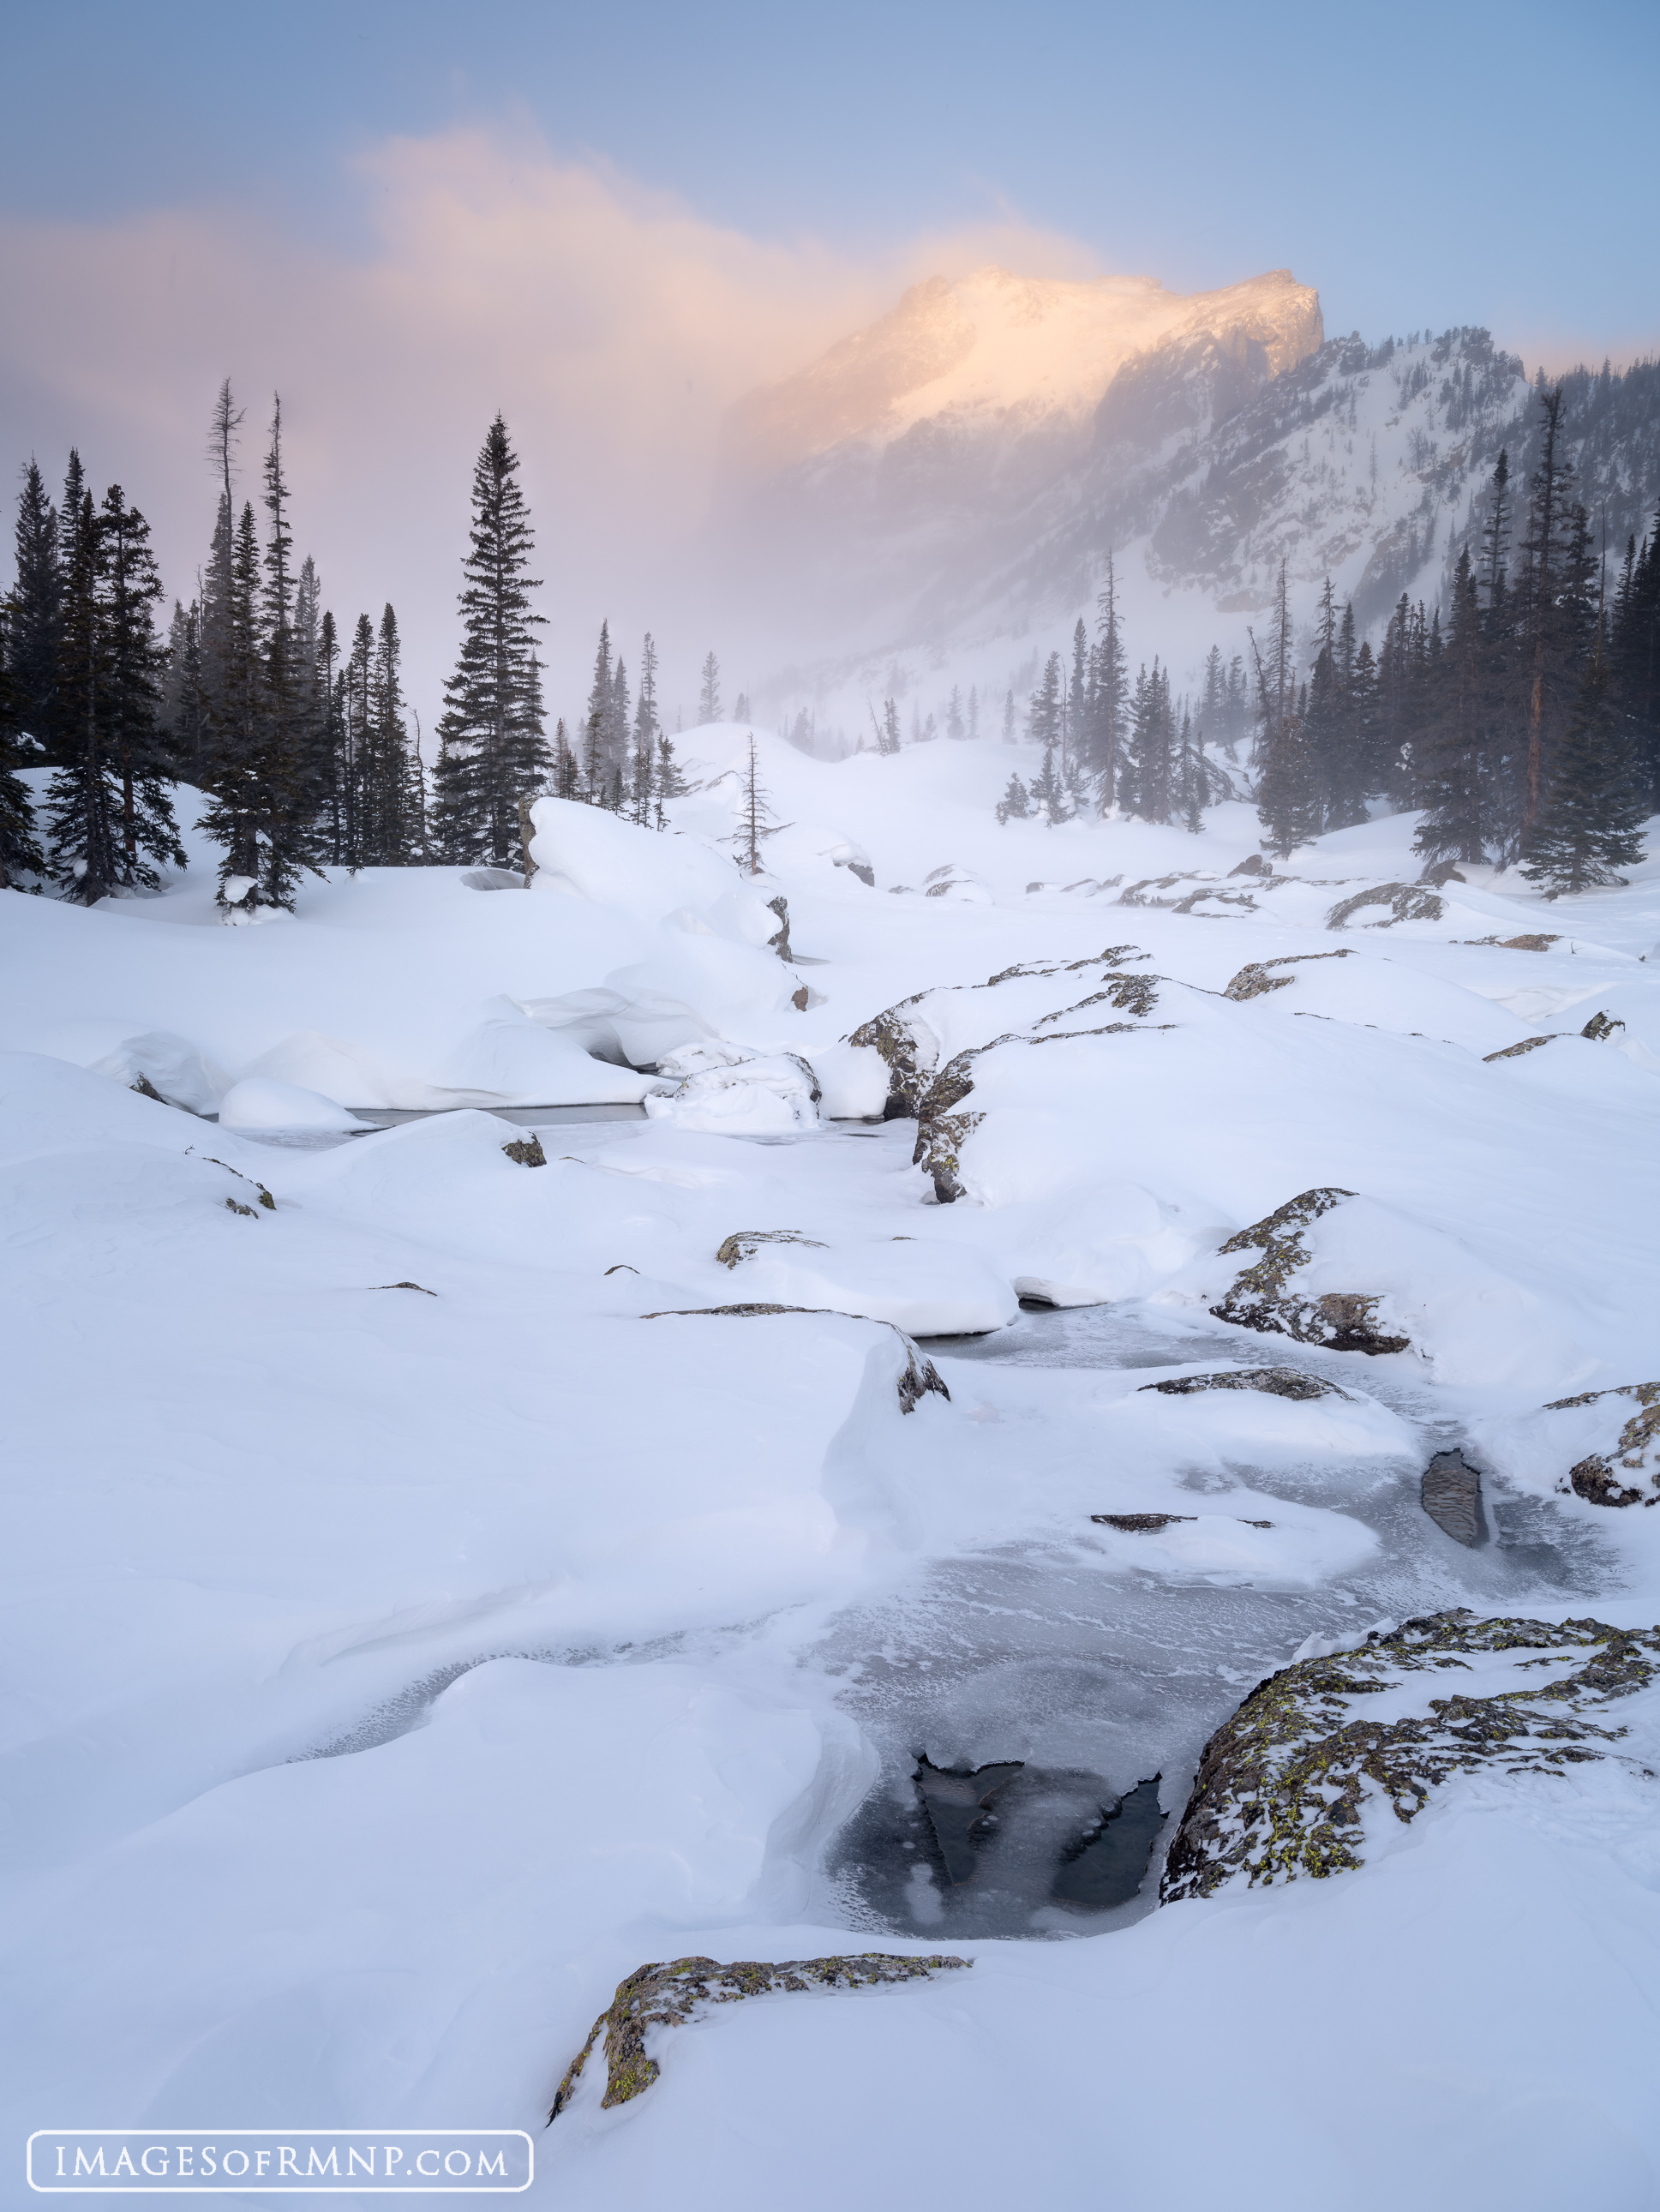 A partially frozen stream can be seen in this snowy landscape as Hallett Peak glows in the warm light on this chilly morning.